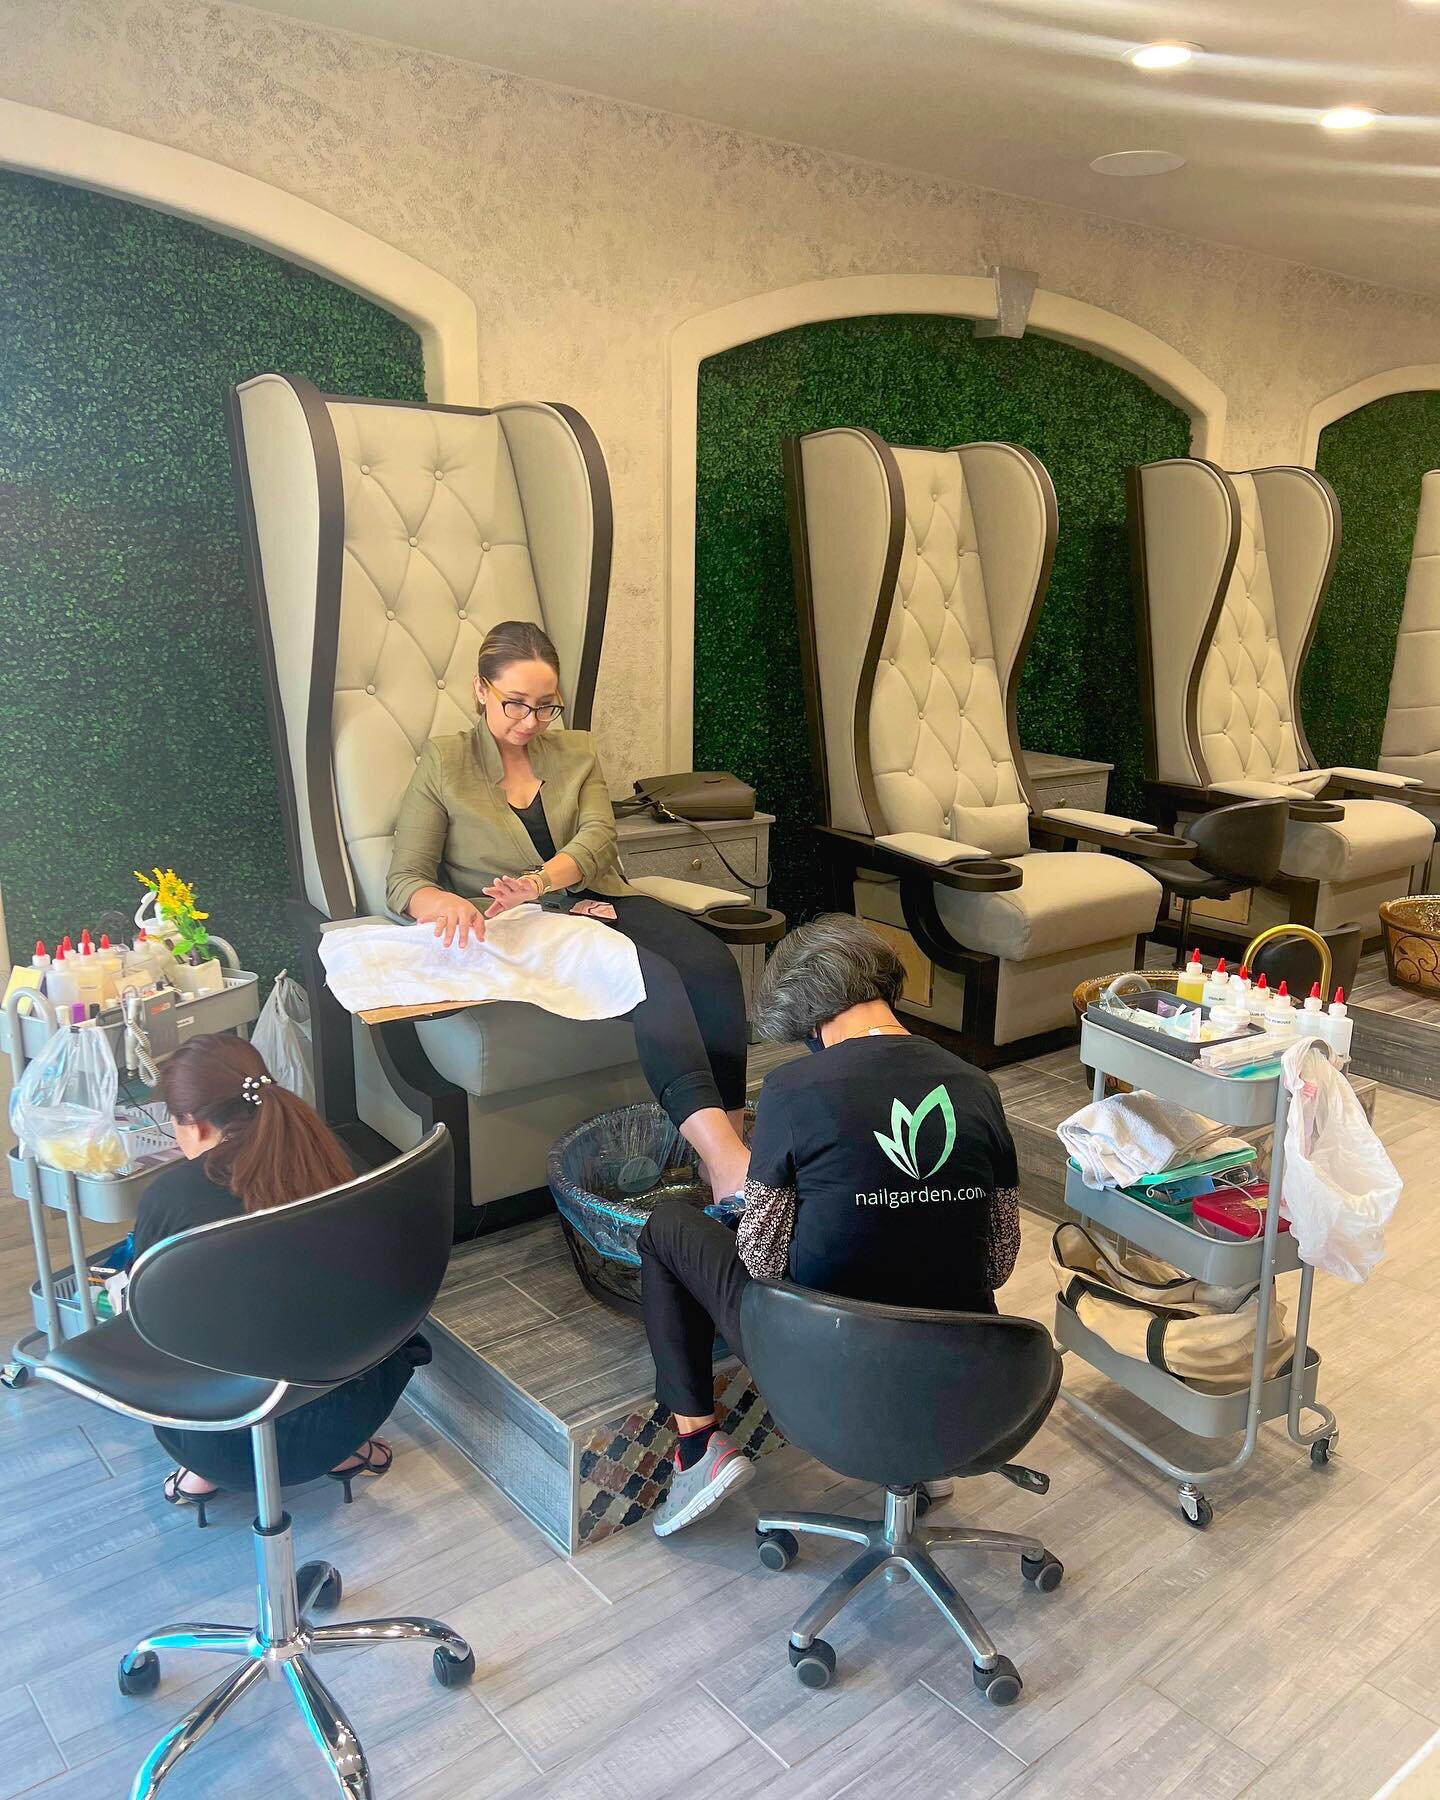 Ready for another beautiful day at Nail Garden Porter Ranch!💚Early morning client here, book full of appts today, our team is ready to pamper you💅🏼Call ☎️ 818.488.1140 or click on link in bio to book! XO #nailgarden #nails #porterranch #beauty #be